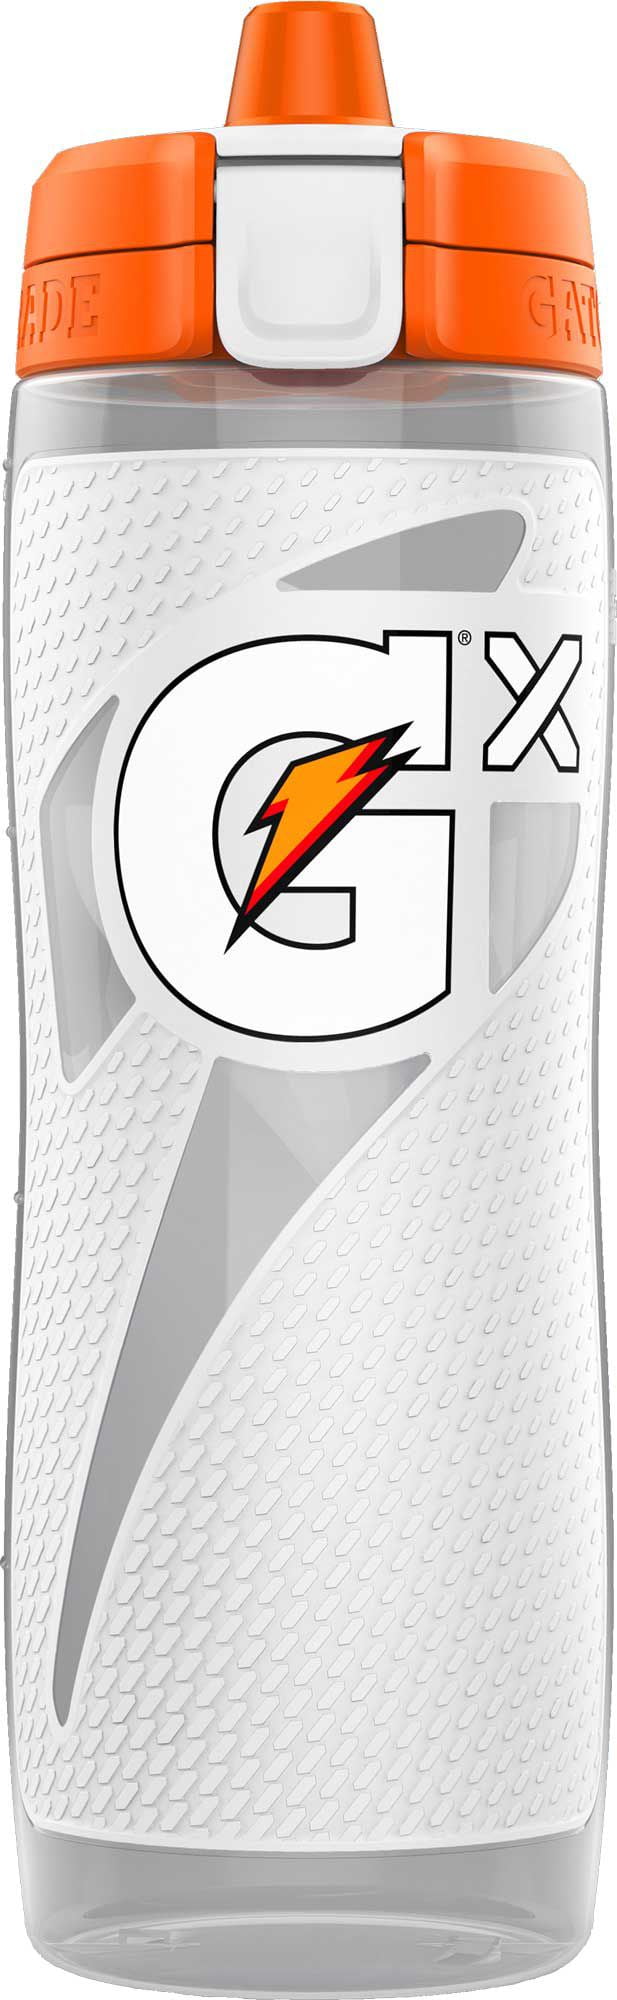 White Gatorade GX Bottle 30 oz Rare Black and Colors IN HAND NEW READY TO SHIP 